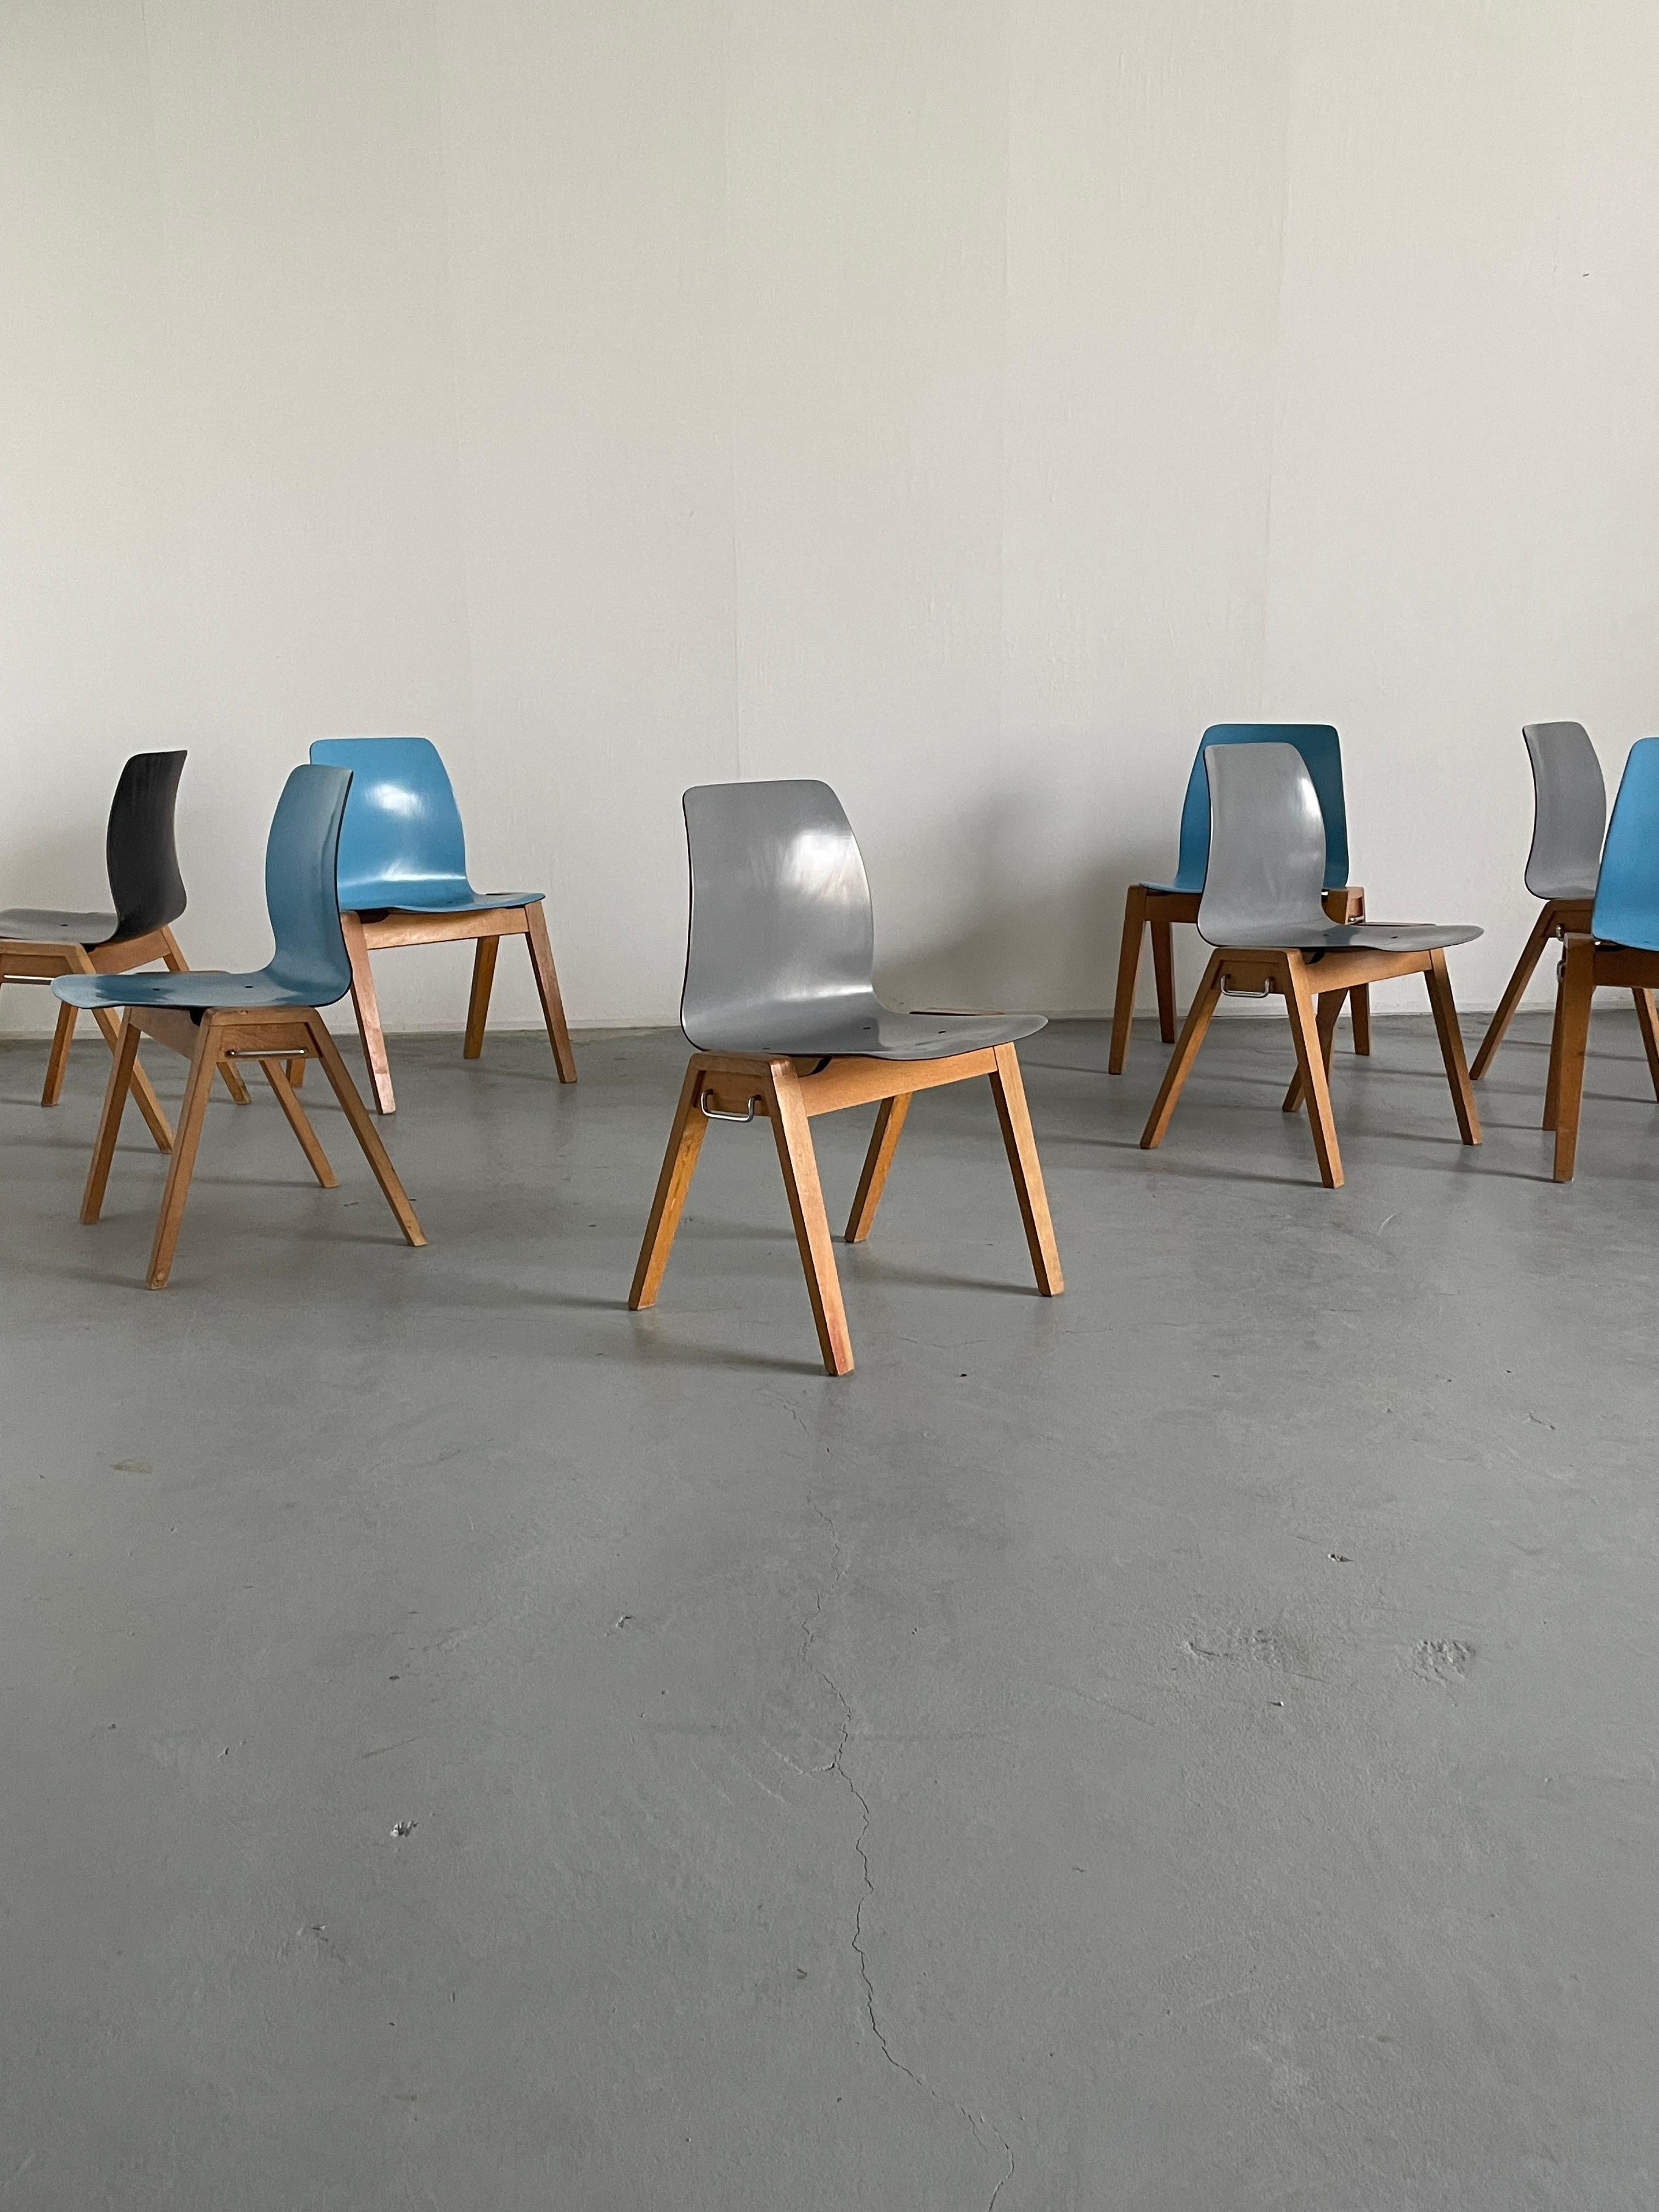 Mid-Century Modern stackable dining chairs or visitor chairs with a wooden base and molded lacquered plywood seat, a technology invented by the manufacturing company Flötotto. Produced during the 1960s.
High production quality.

Real piece of